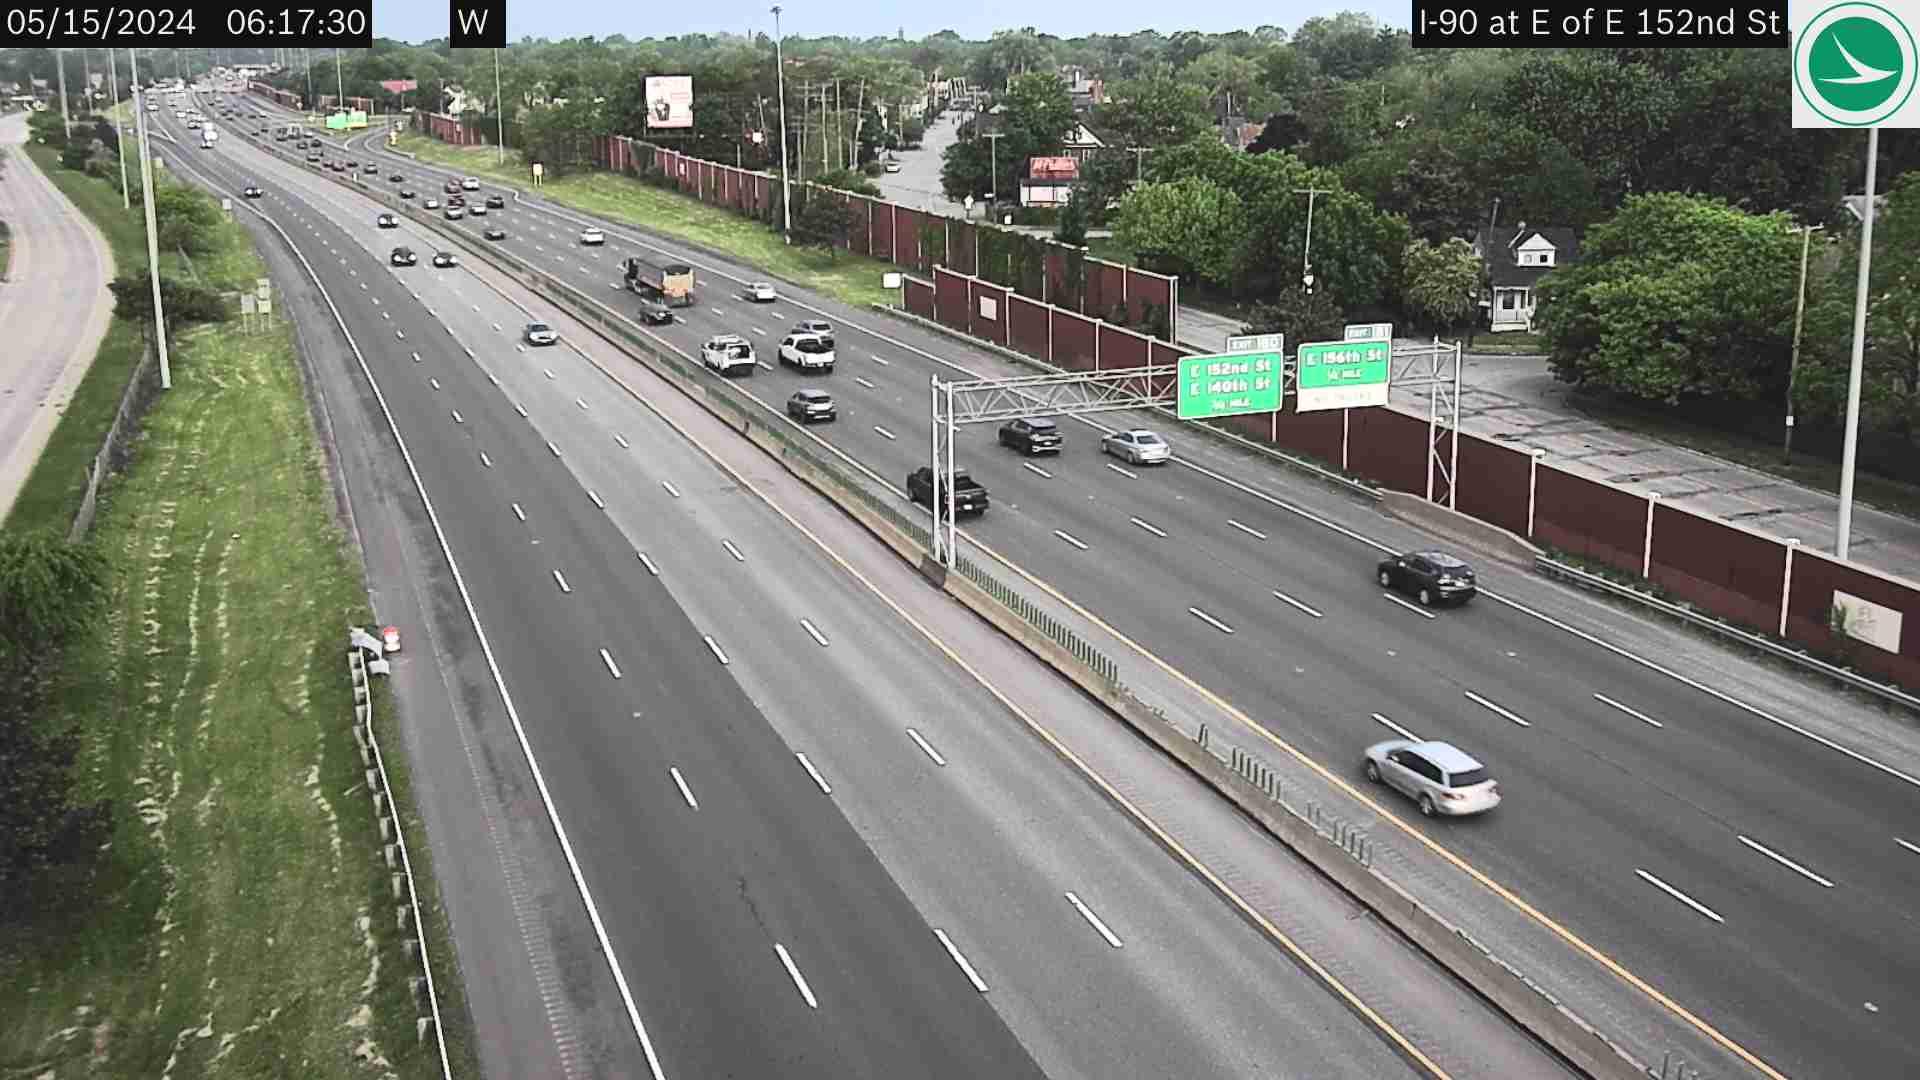 Traffic Cam Collinwood: I-90 E of E 152nd St Player